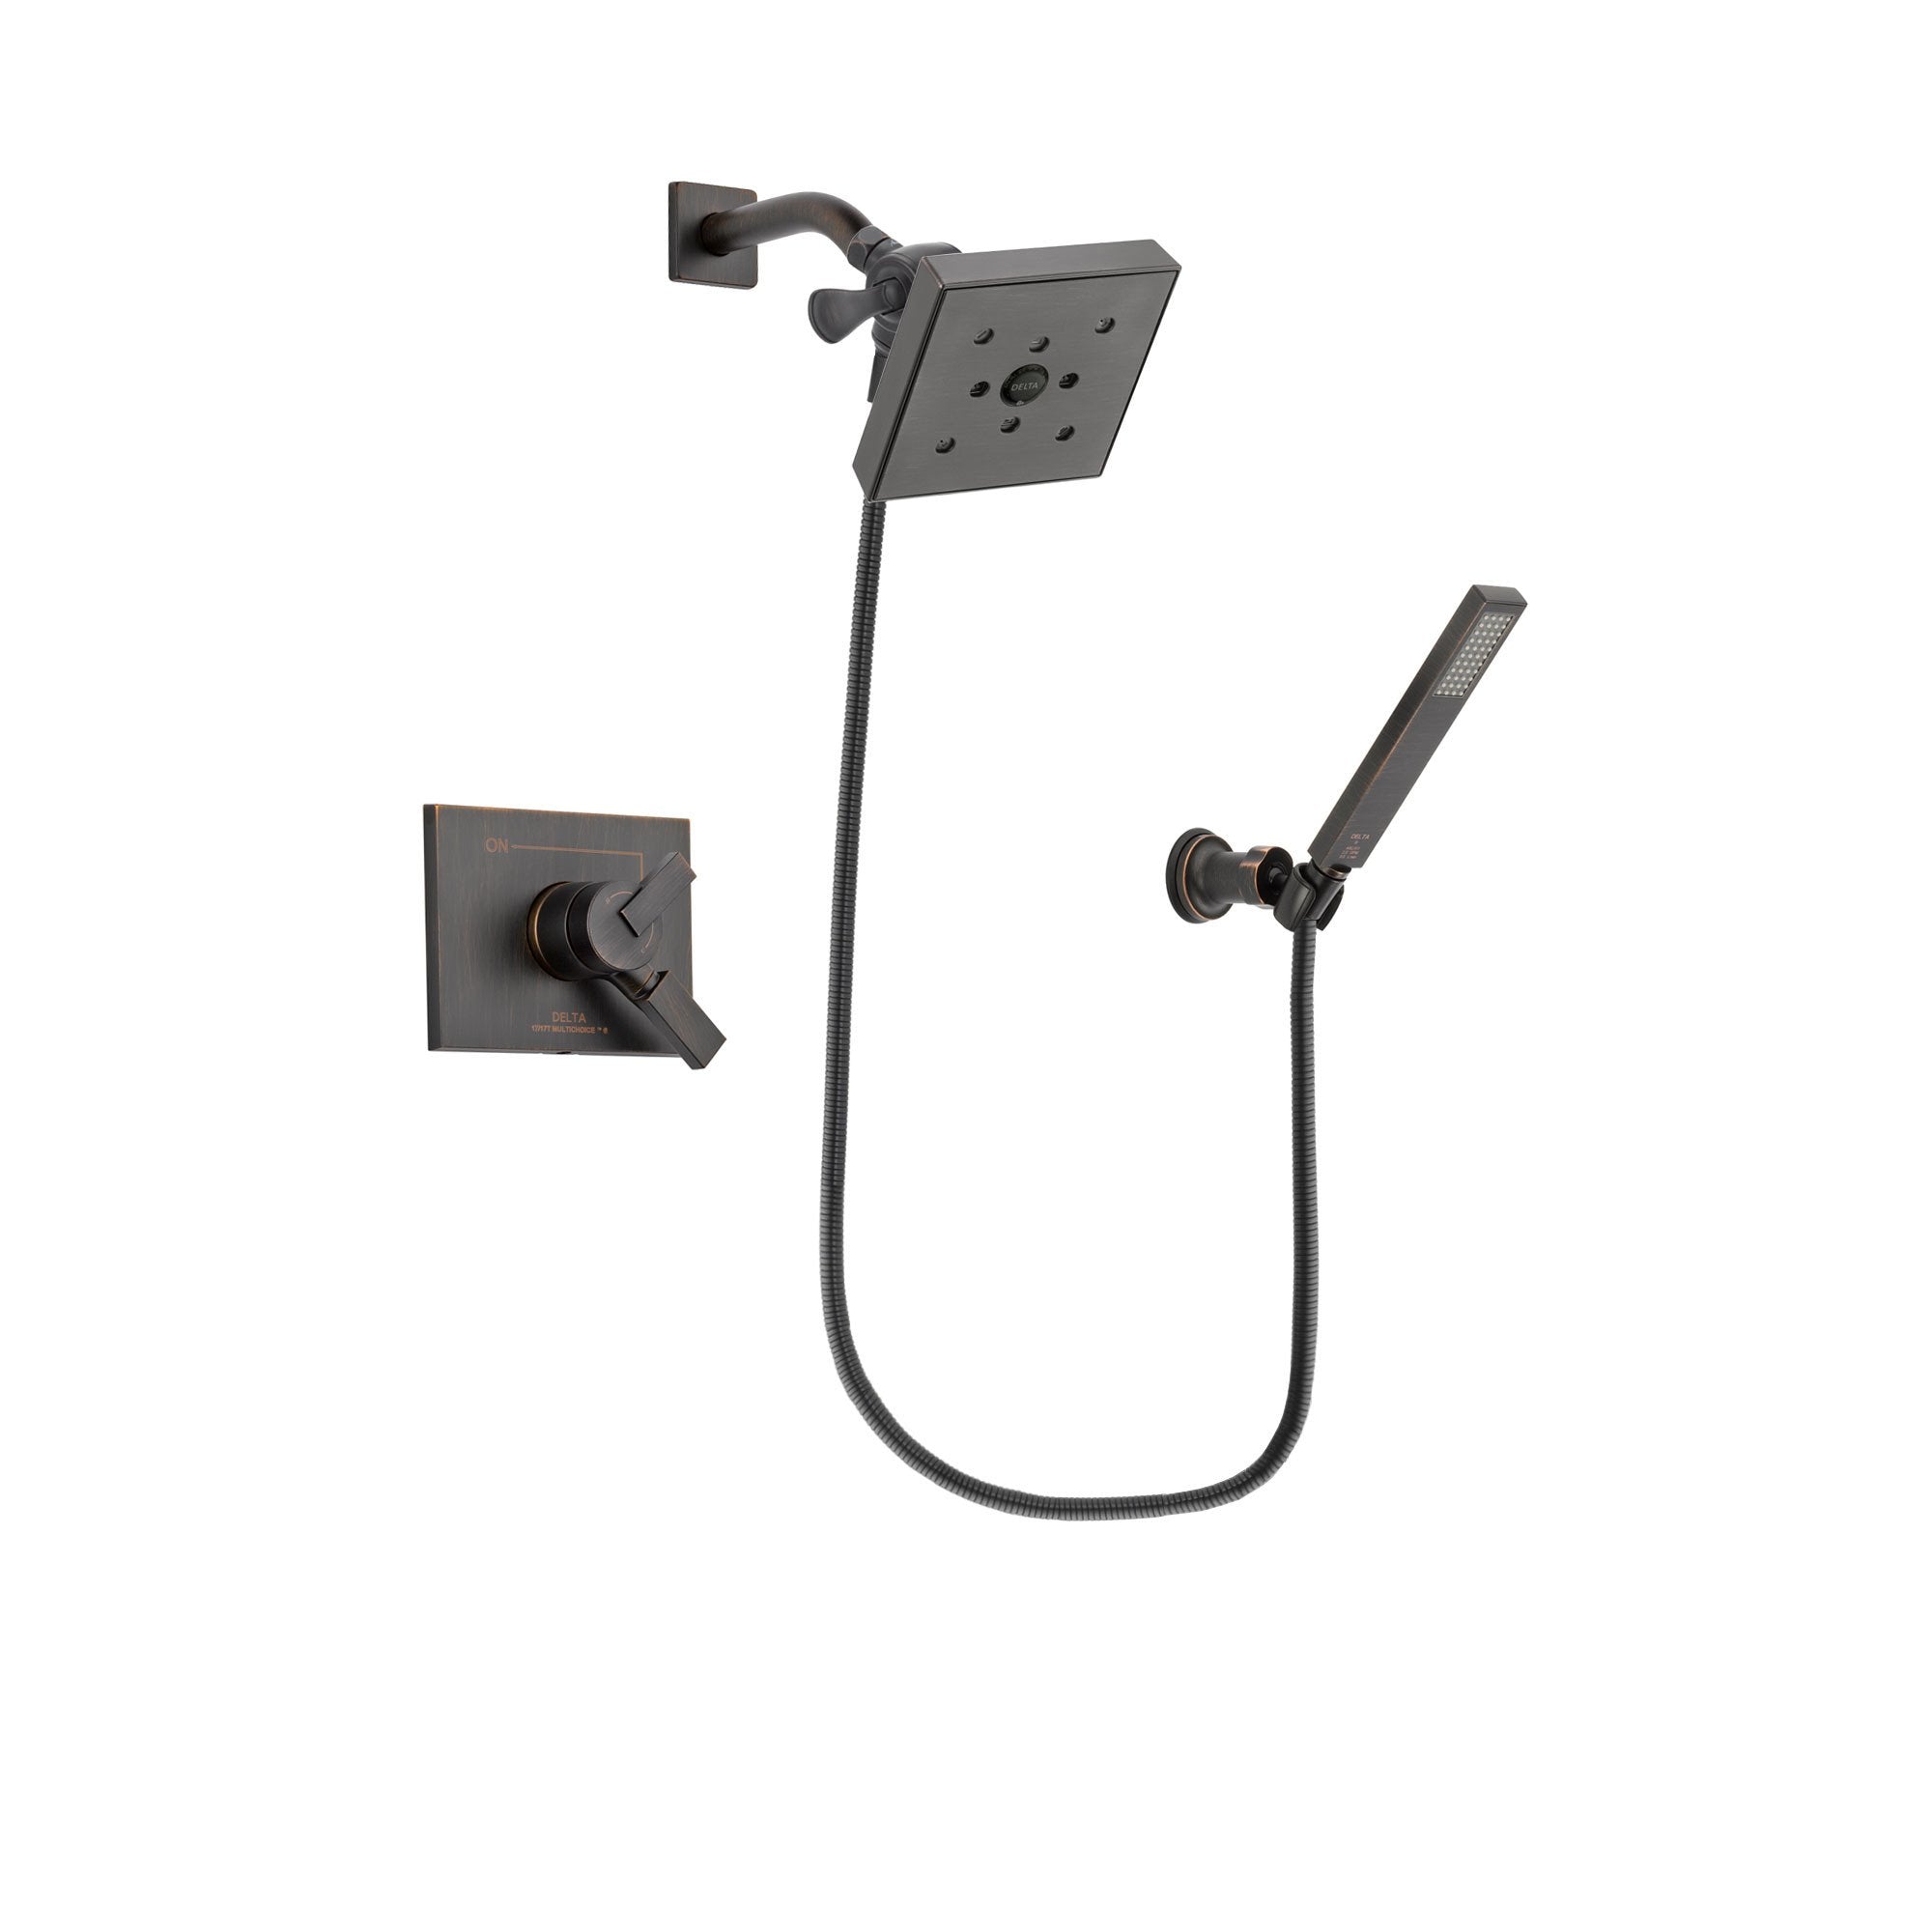 Delta Vero Venetian Bronze Shower Faucet System Package with Hand Spray DSP3280V